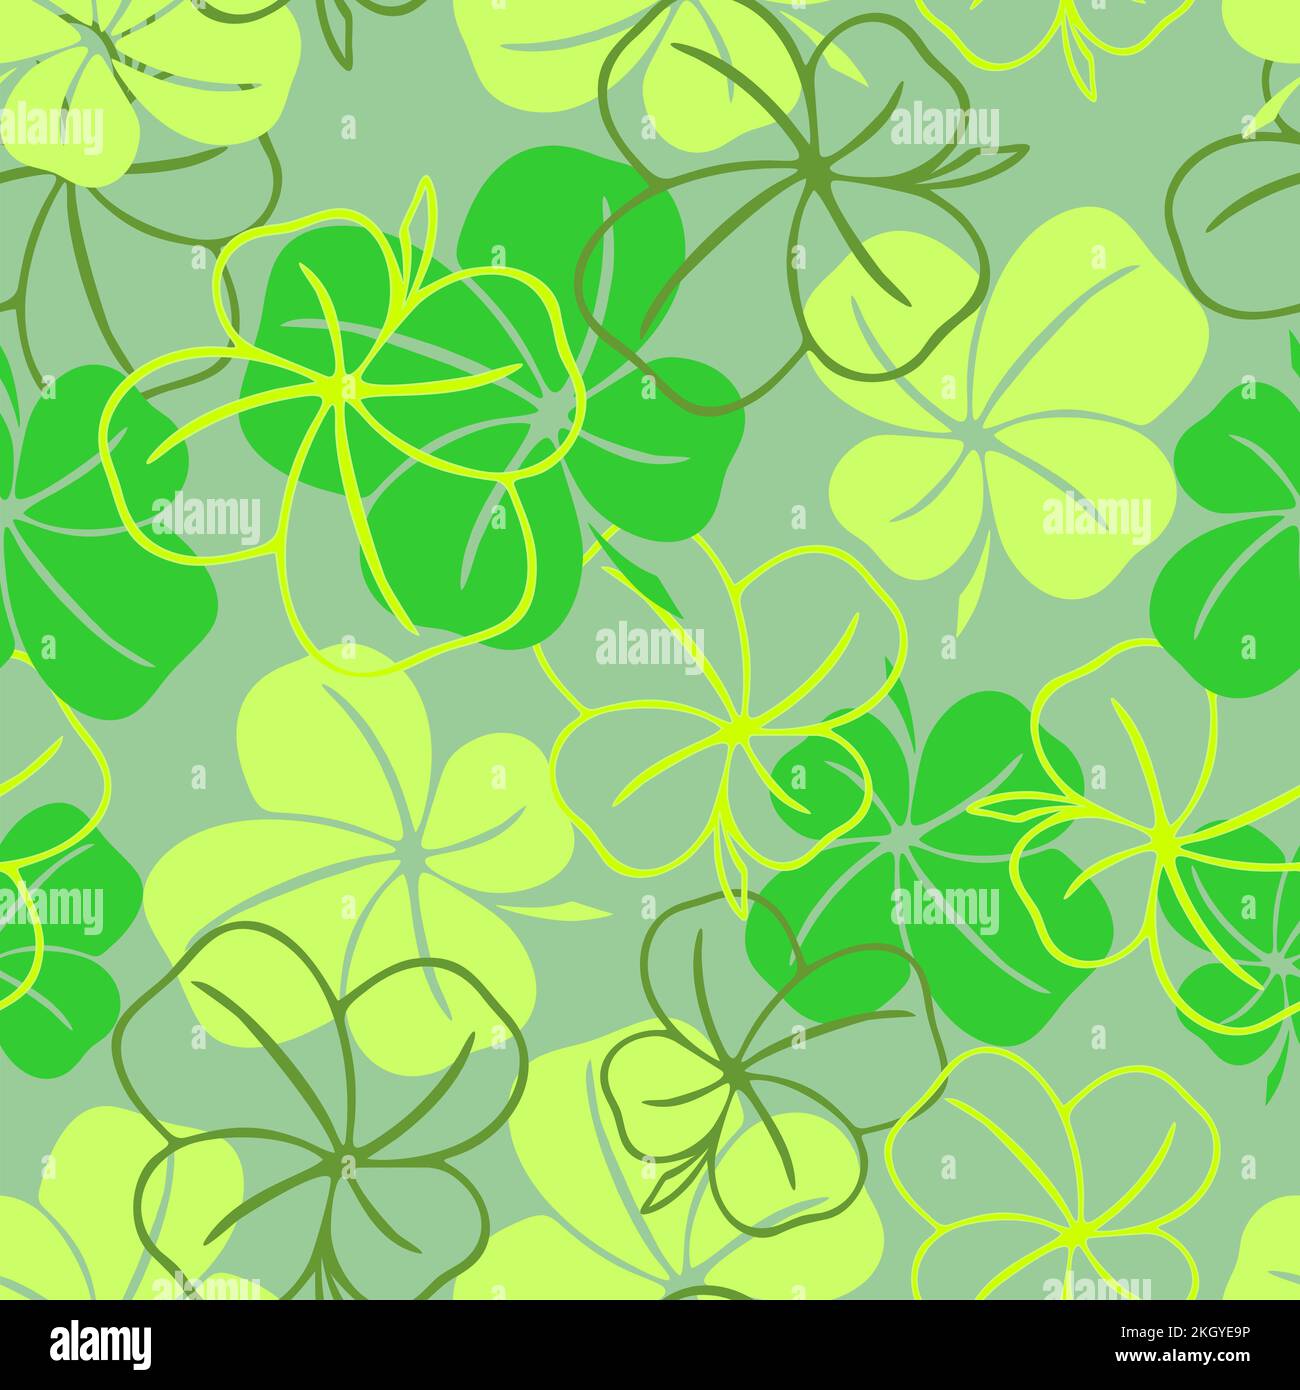 seamless pattern of green contours and silhouettes of a four-leaf clover on a pale green background, texture design Stock Photo